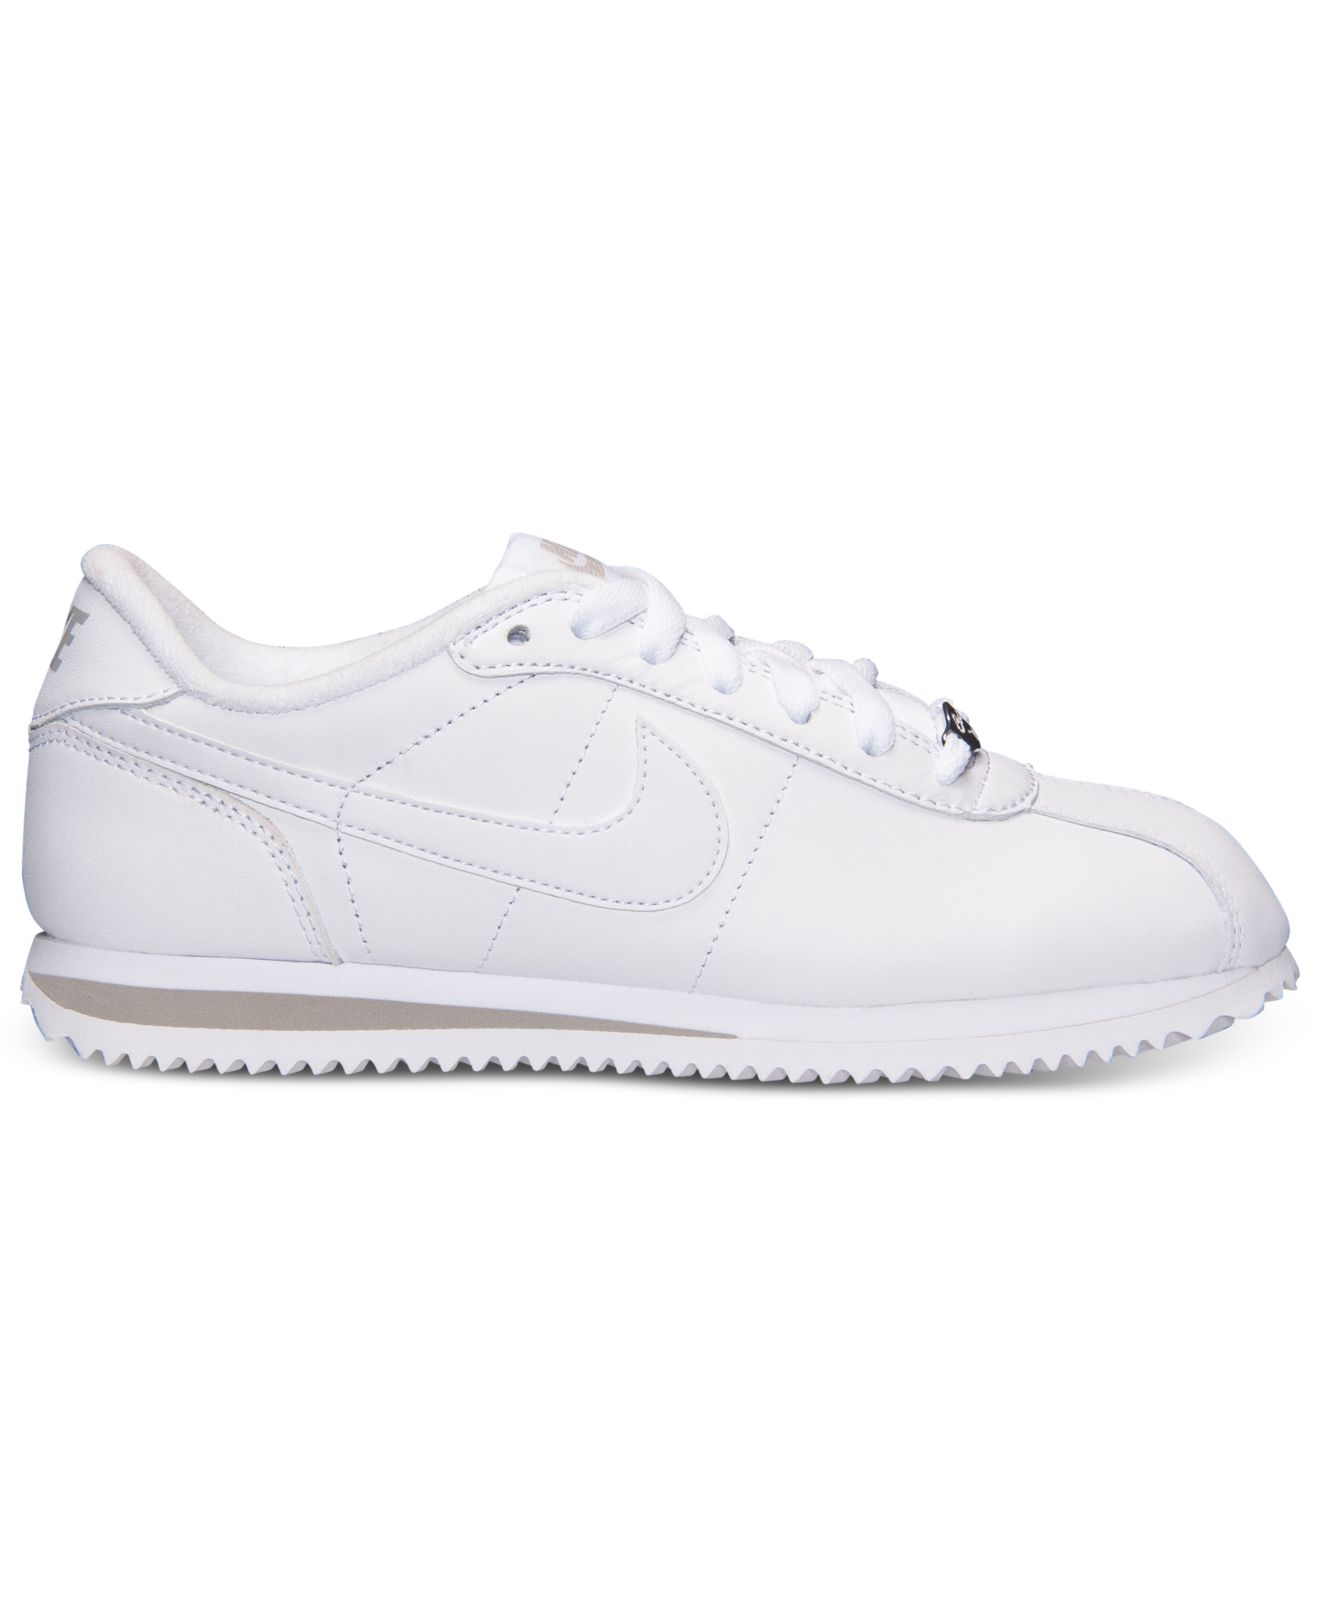 Lyst - Nike Women's Cortez Basic Leather Casual Sneakers From Finish ...